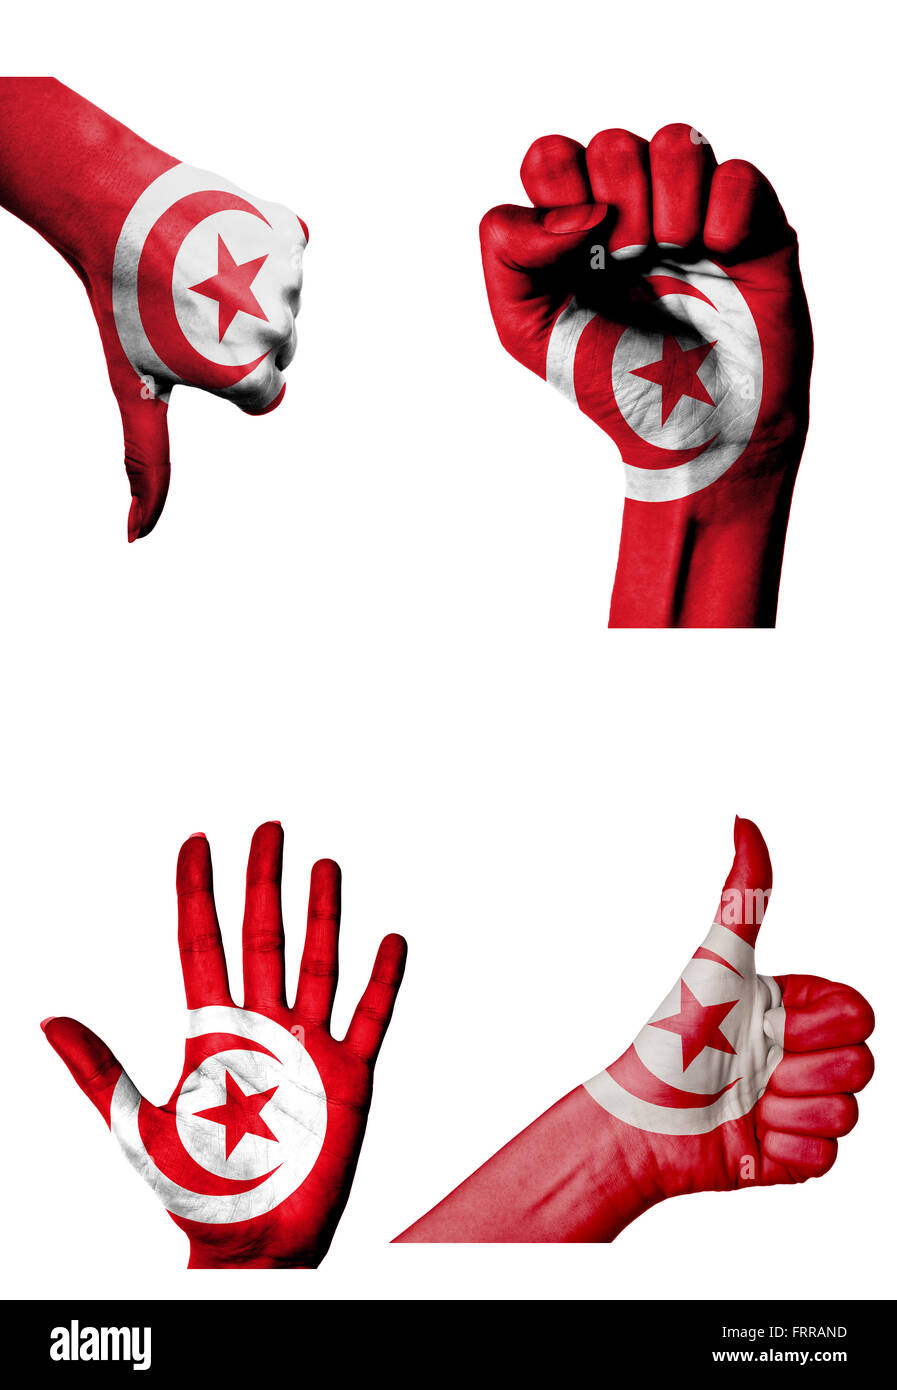 hands with multiple gestures (open palm, closed fist, thumbs up and down) with Tunisia flag painted isolated on white Stock Photo